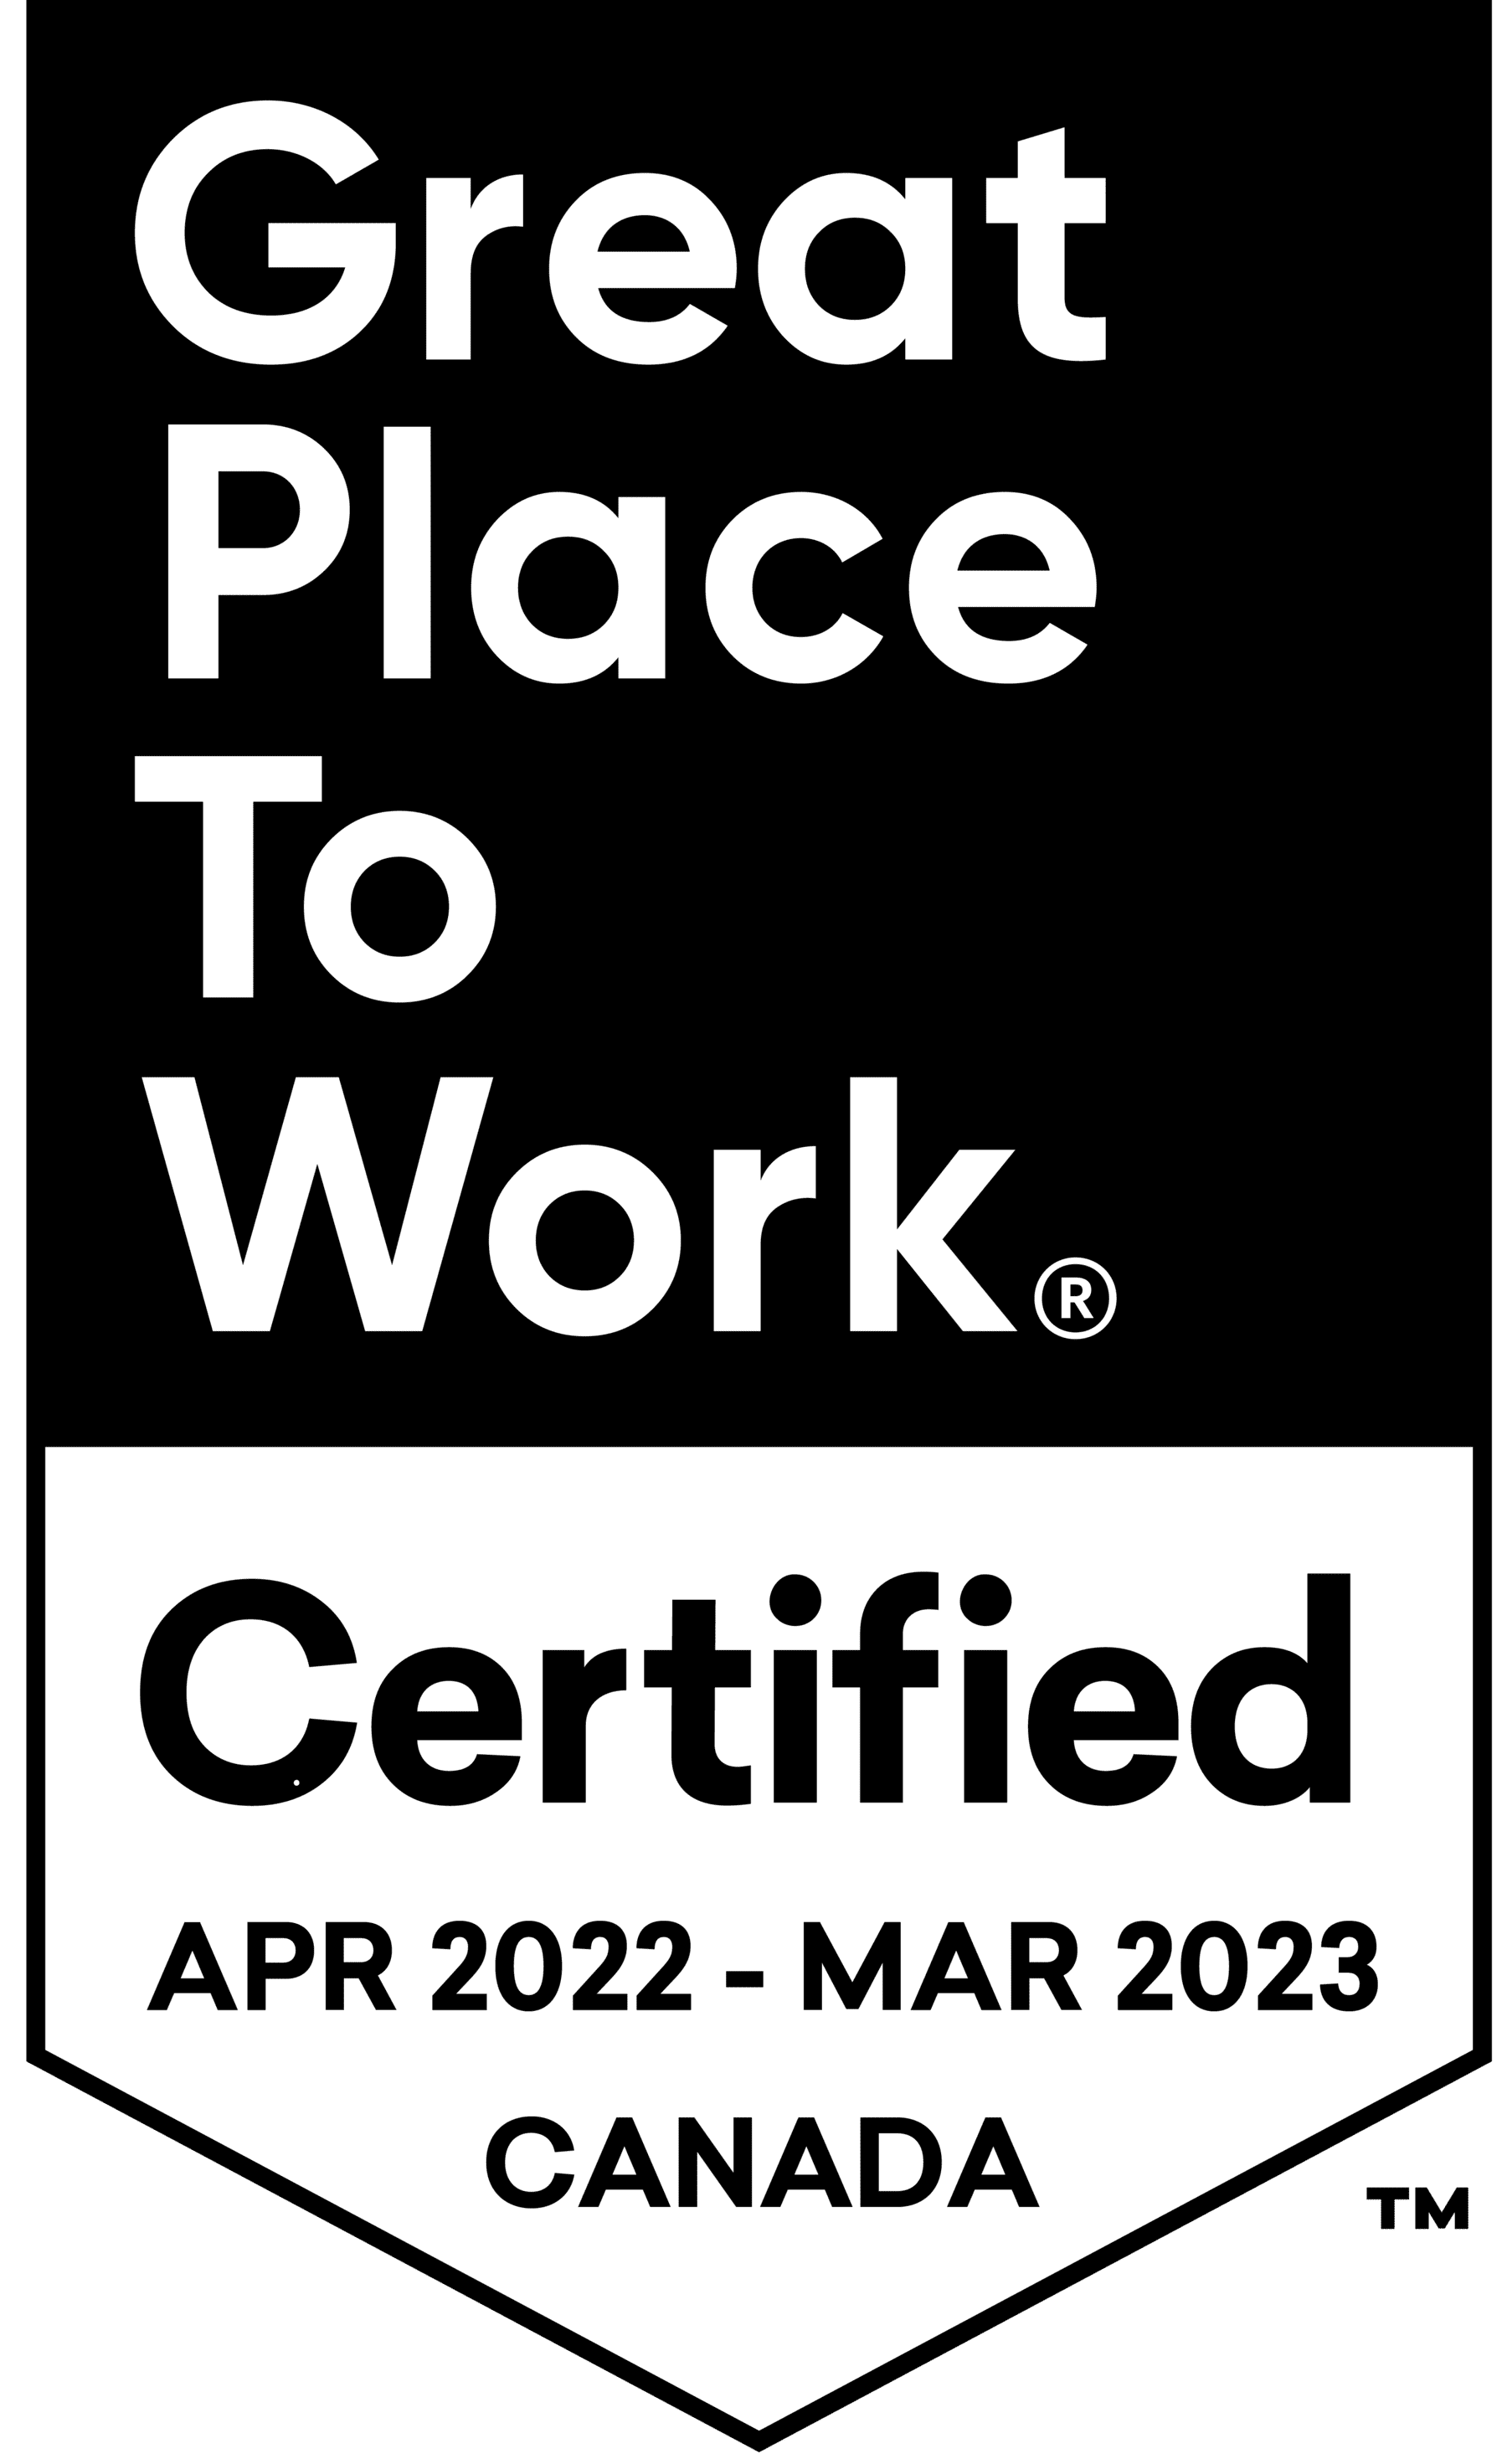 La Compagnie de Solution becomes a Certified Great Place to Work